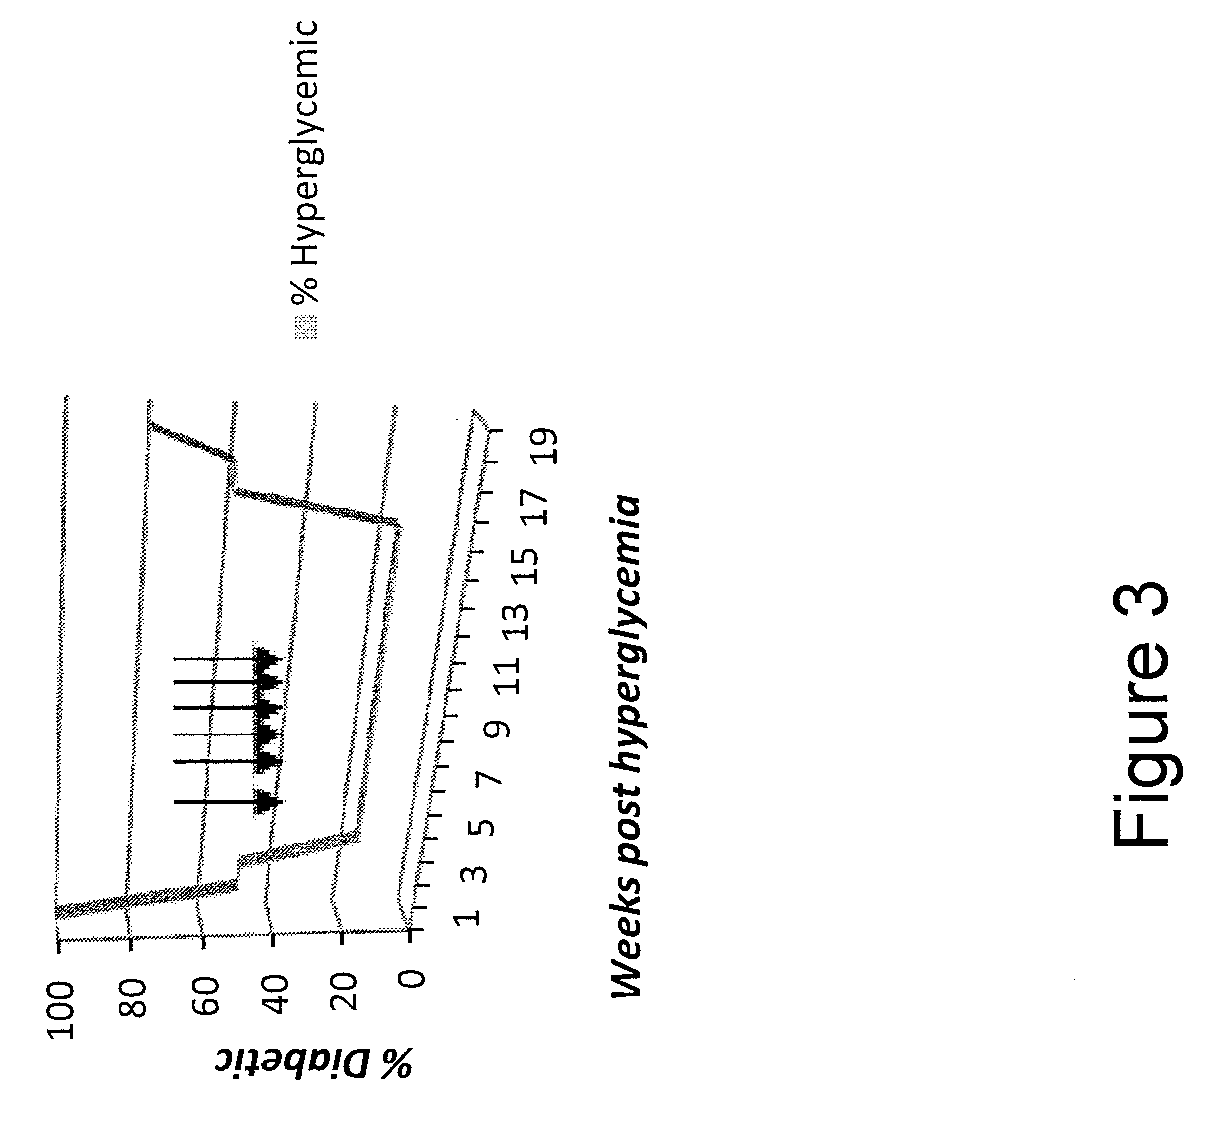 Peptides for modulating t-cell activity and uses therof